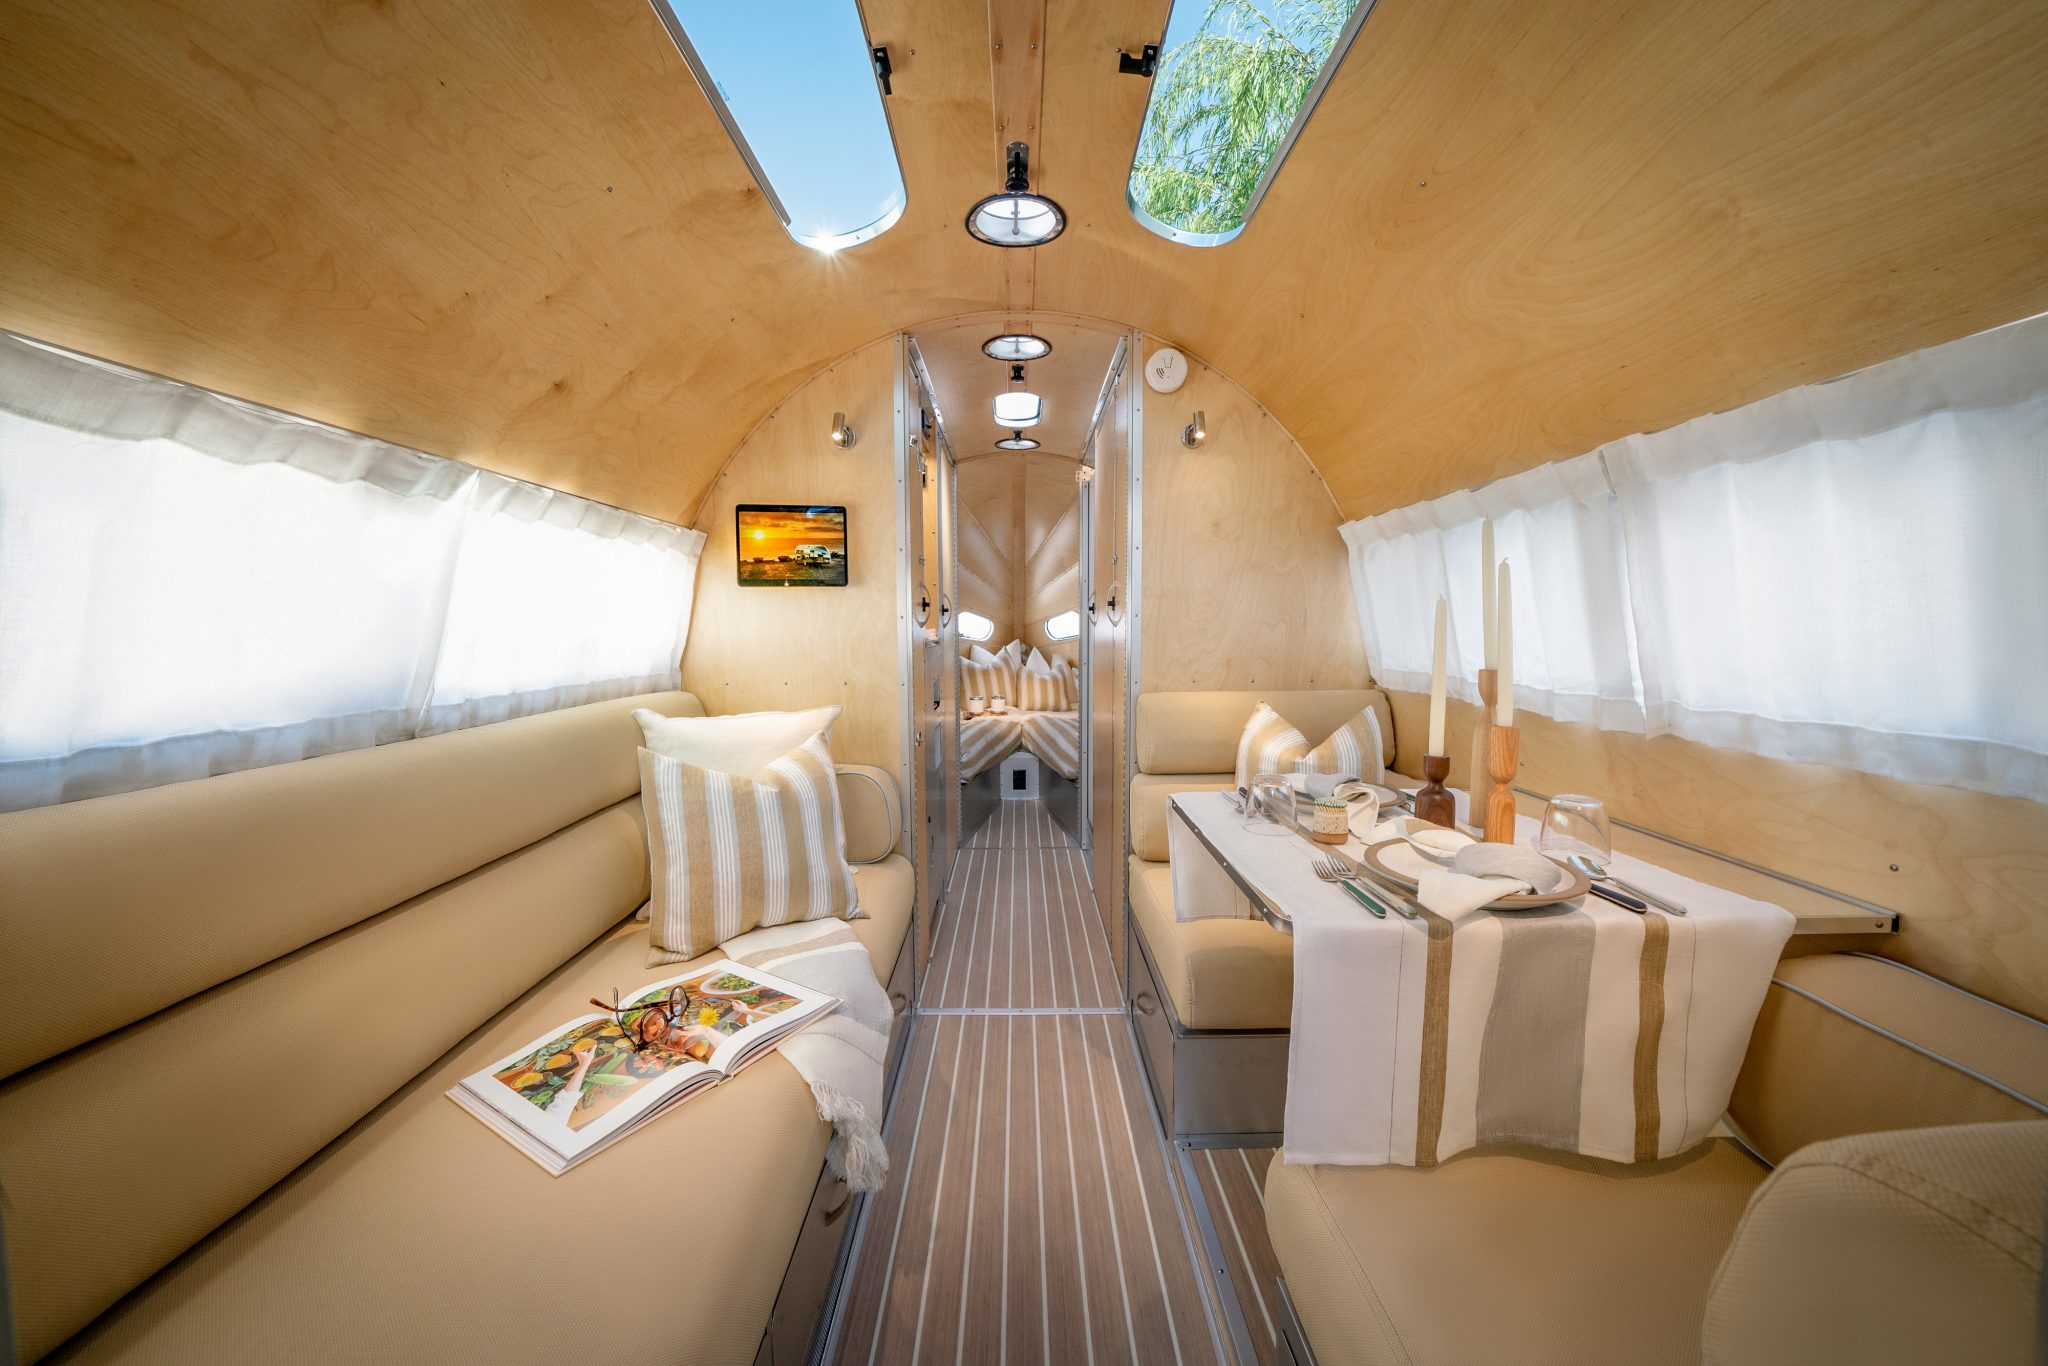 What To Expect When Purchasing A Luxury Travel Trailer